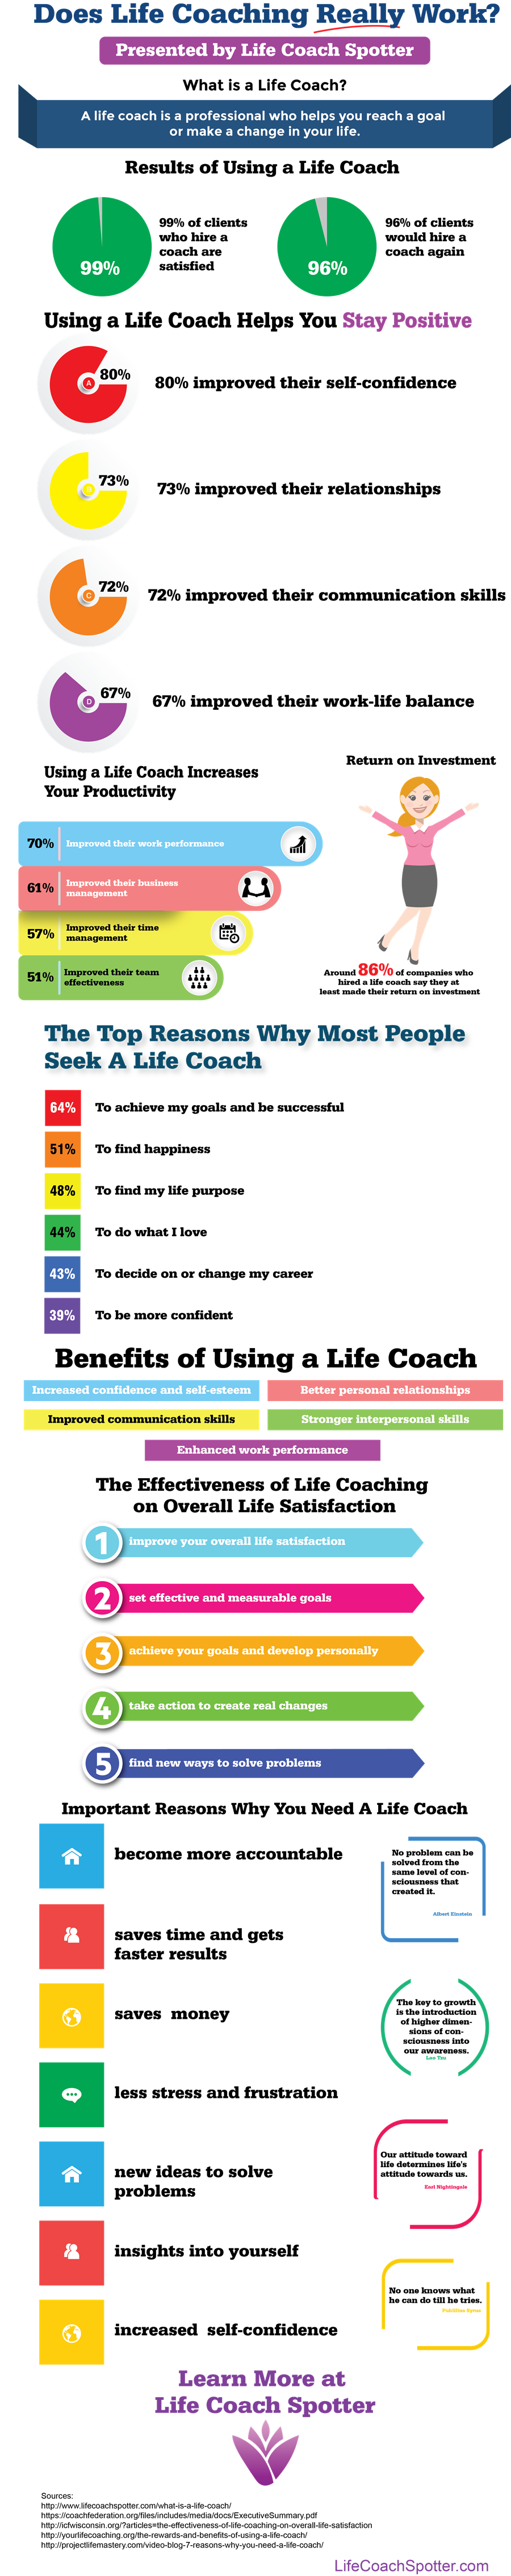 How Life Coach Can Help You Improve the Quality of Your Life